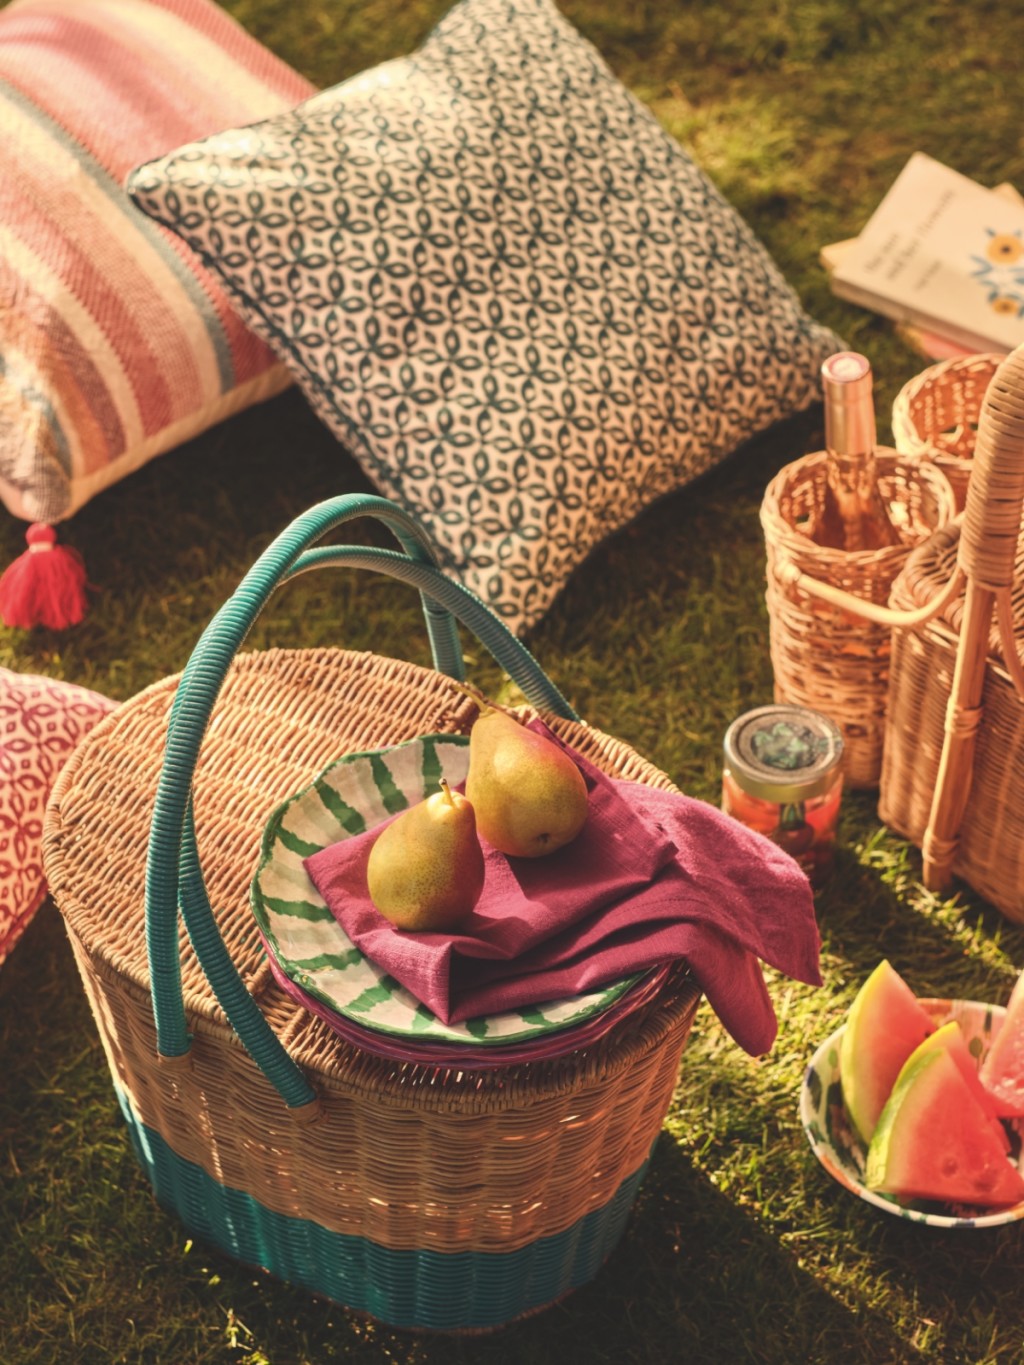 Picnic basket surrounded by patterned cushions. Shop garden accessories